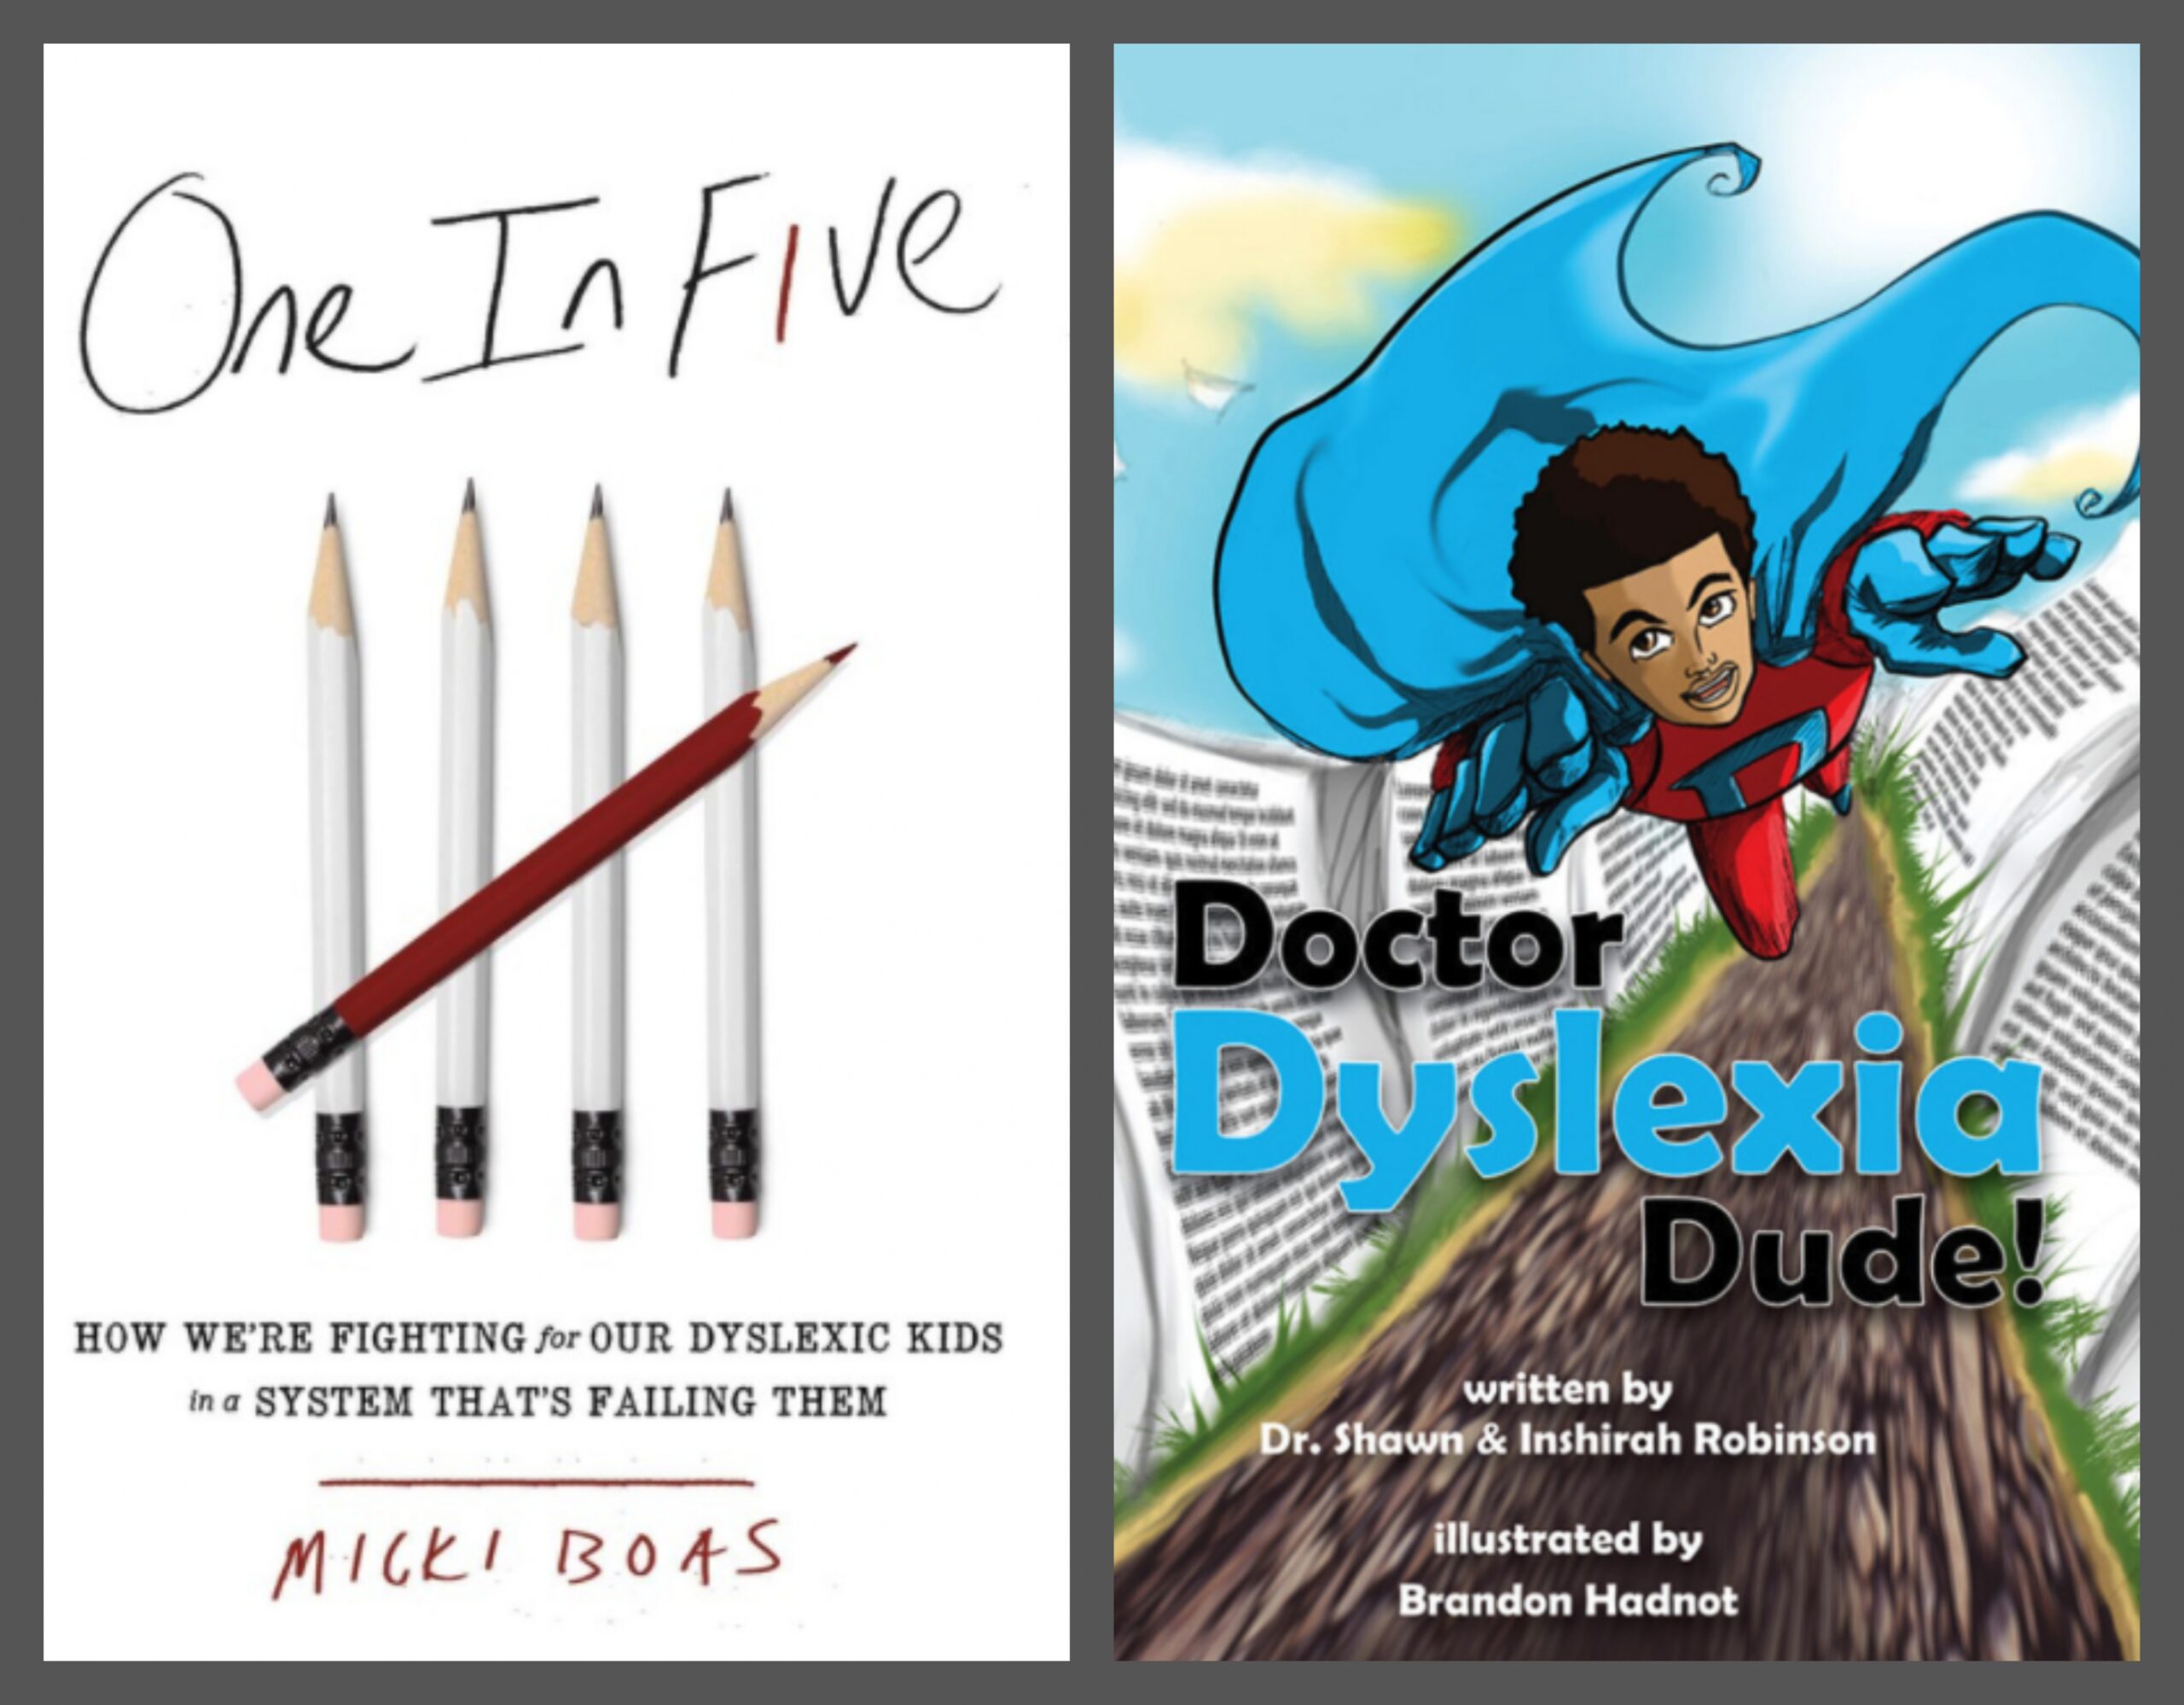 The covers of two books about dyslexia